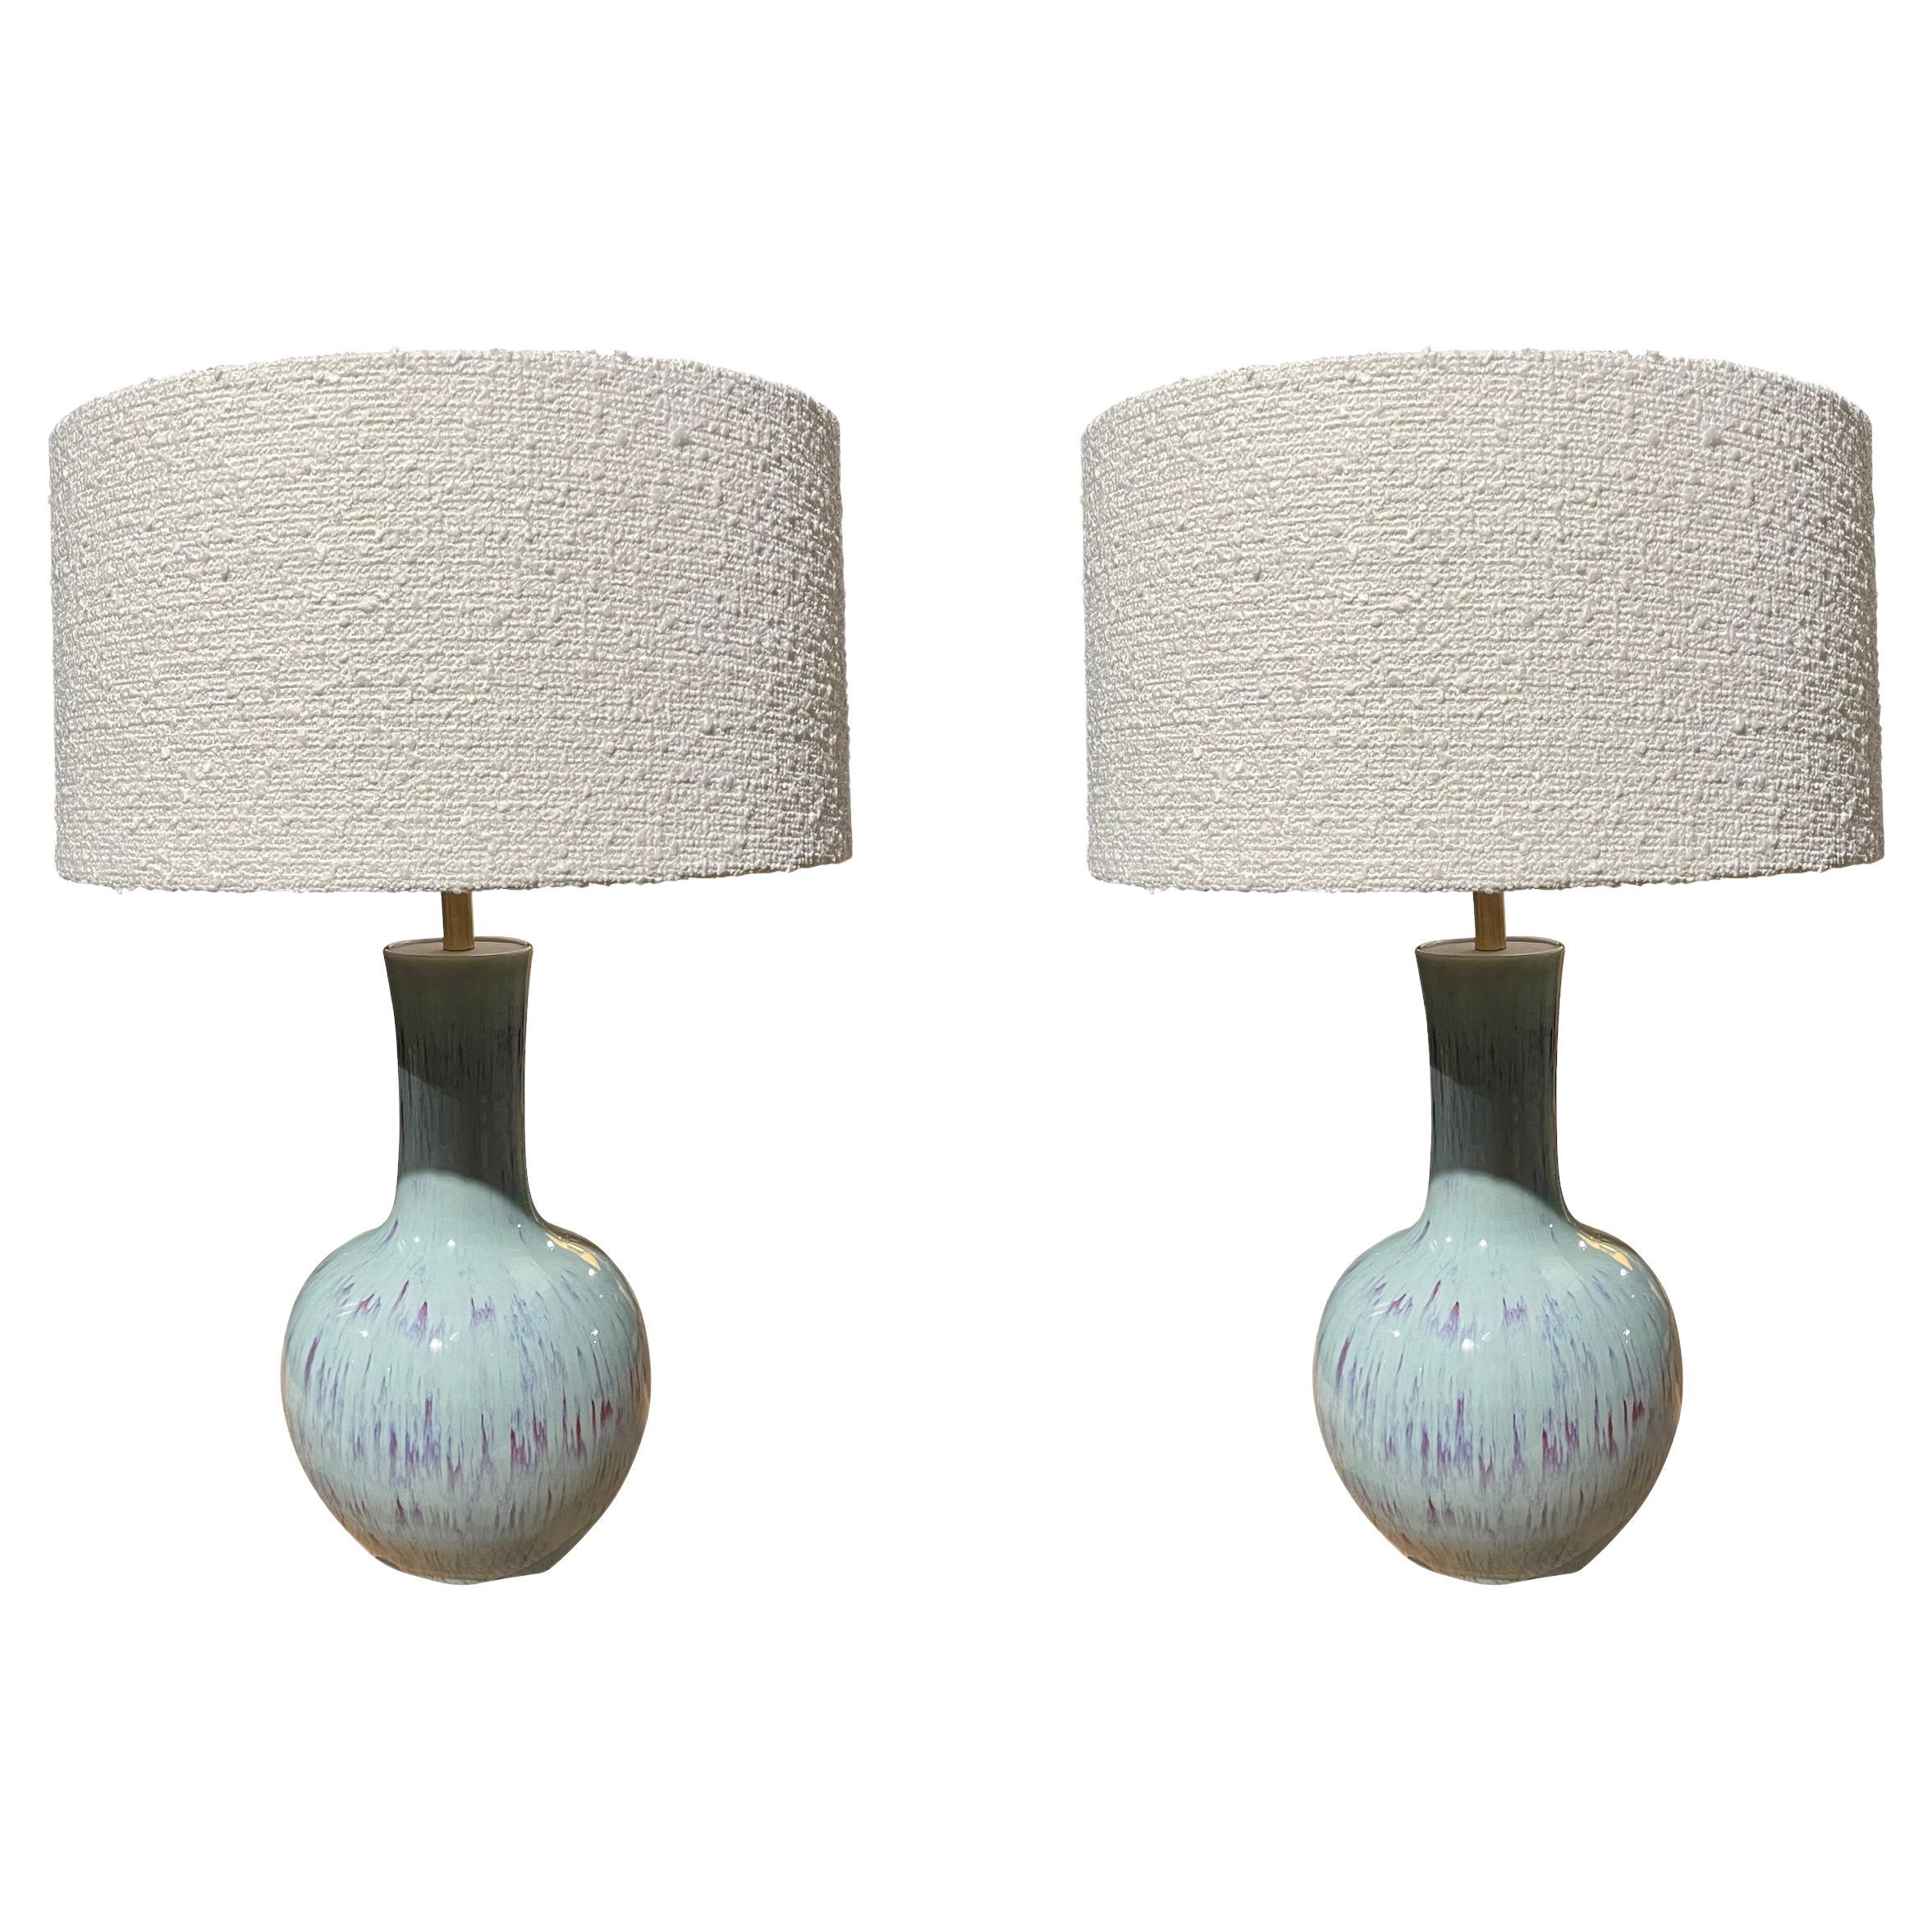 Pale Blue With Purple Pair Table Lamps With Shades, China, Contemporary For Sale